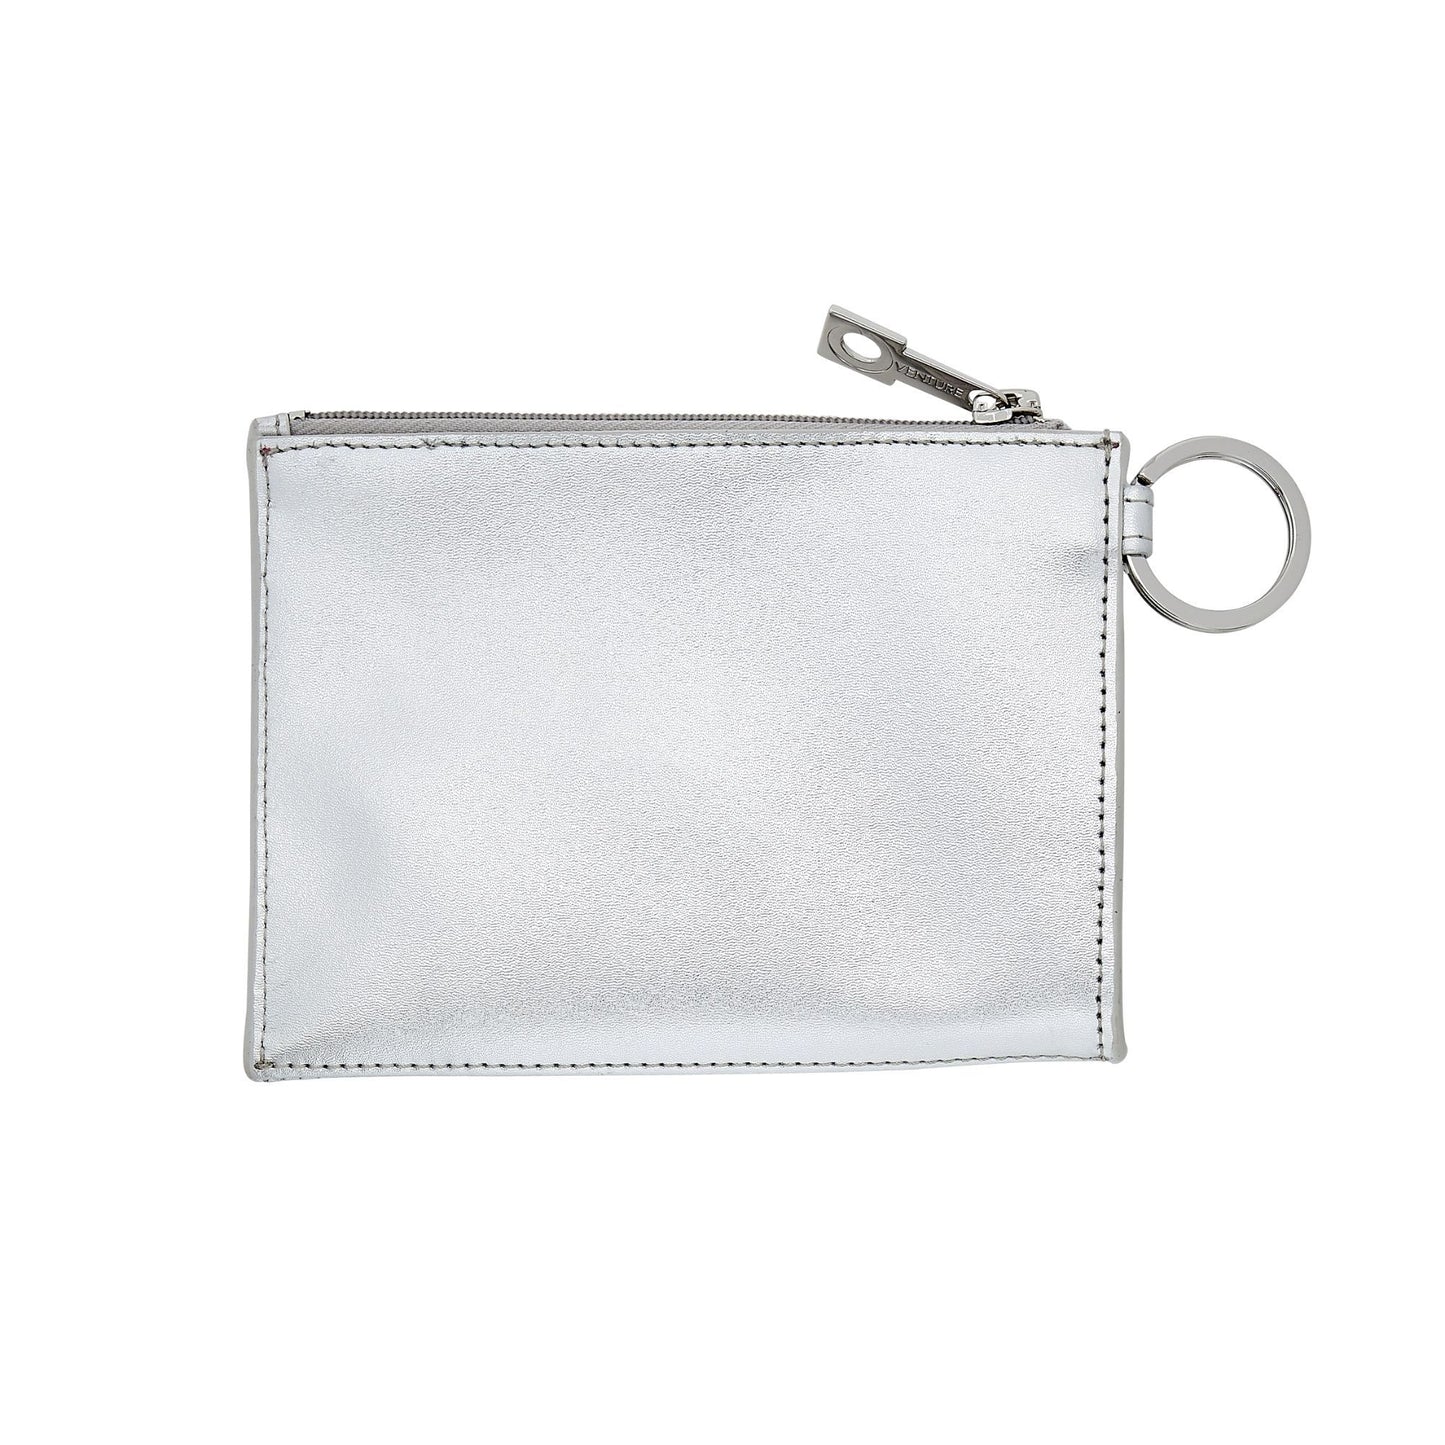 A stylish silver leather keychain wallet for convenience - backside